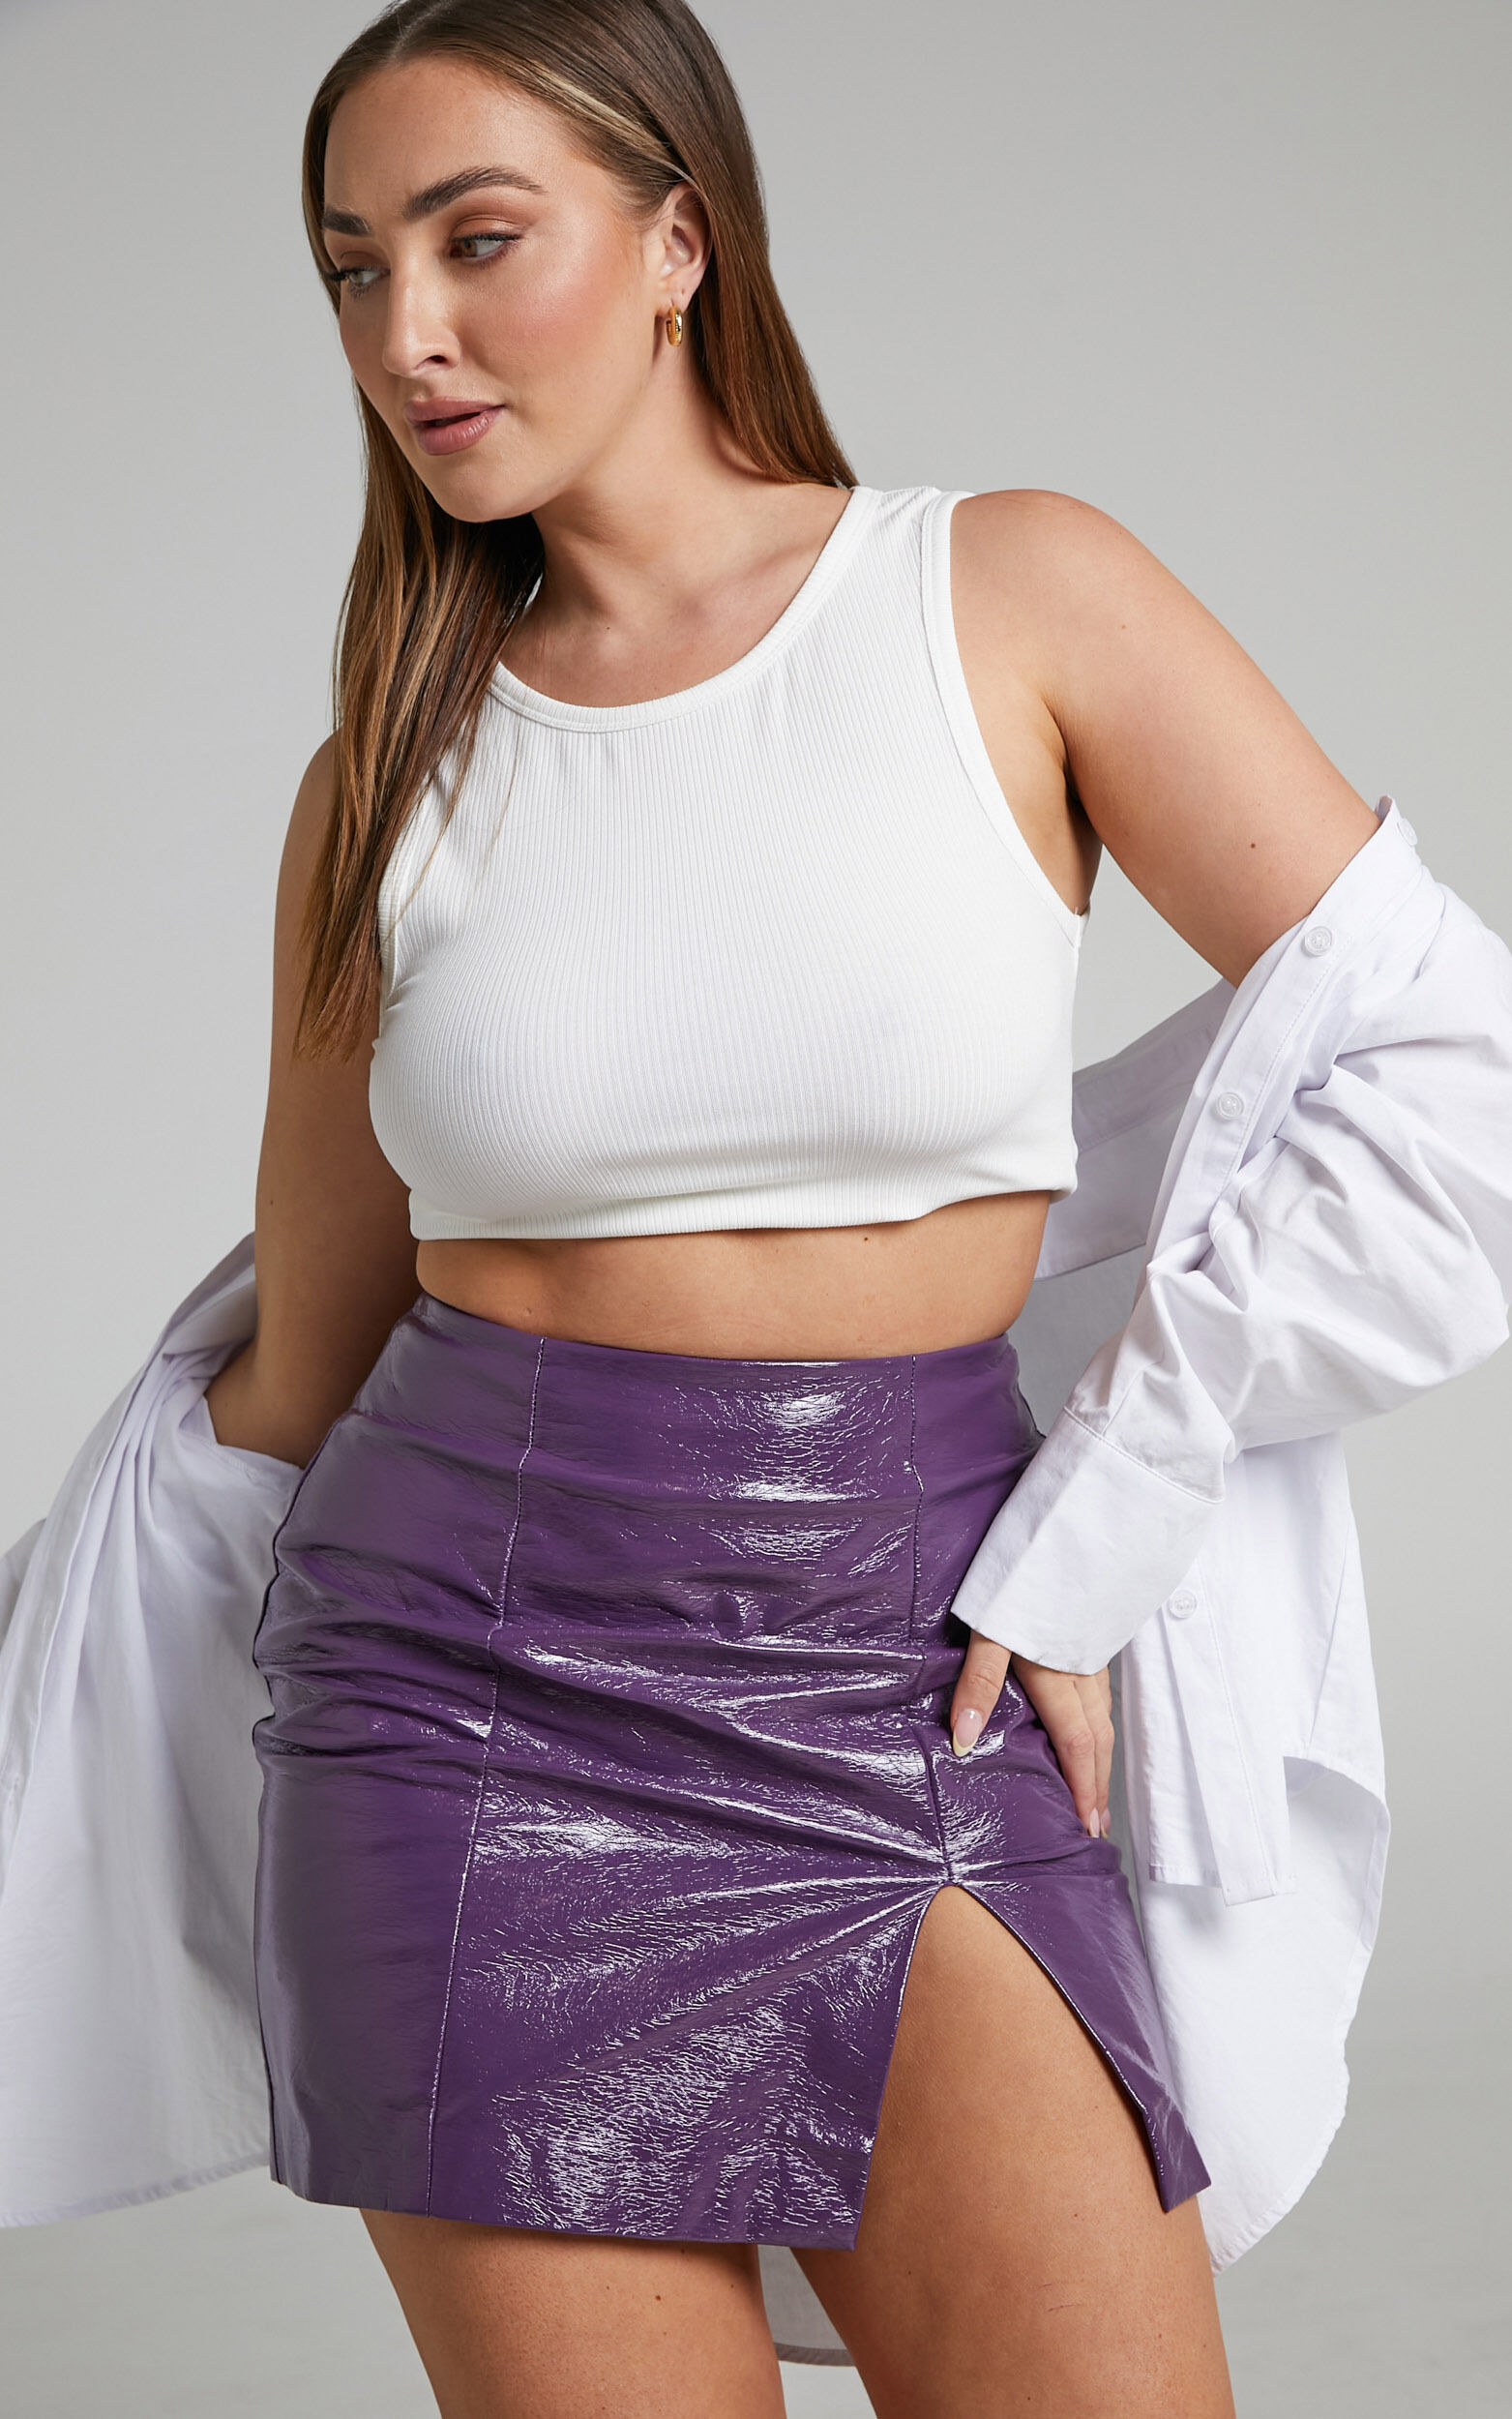 Reiko Patent Faux Leather Mini Skirt in Purple - 04, PRP1, super-hi-res image number null